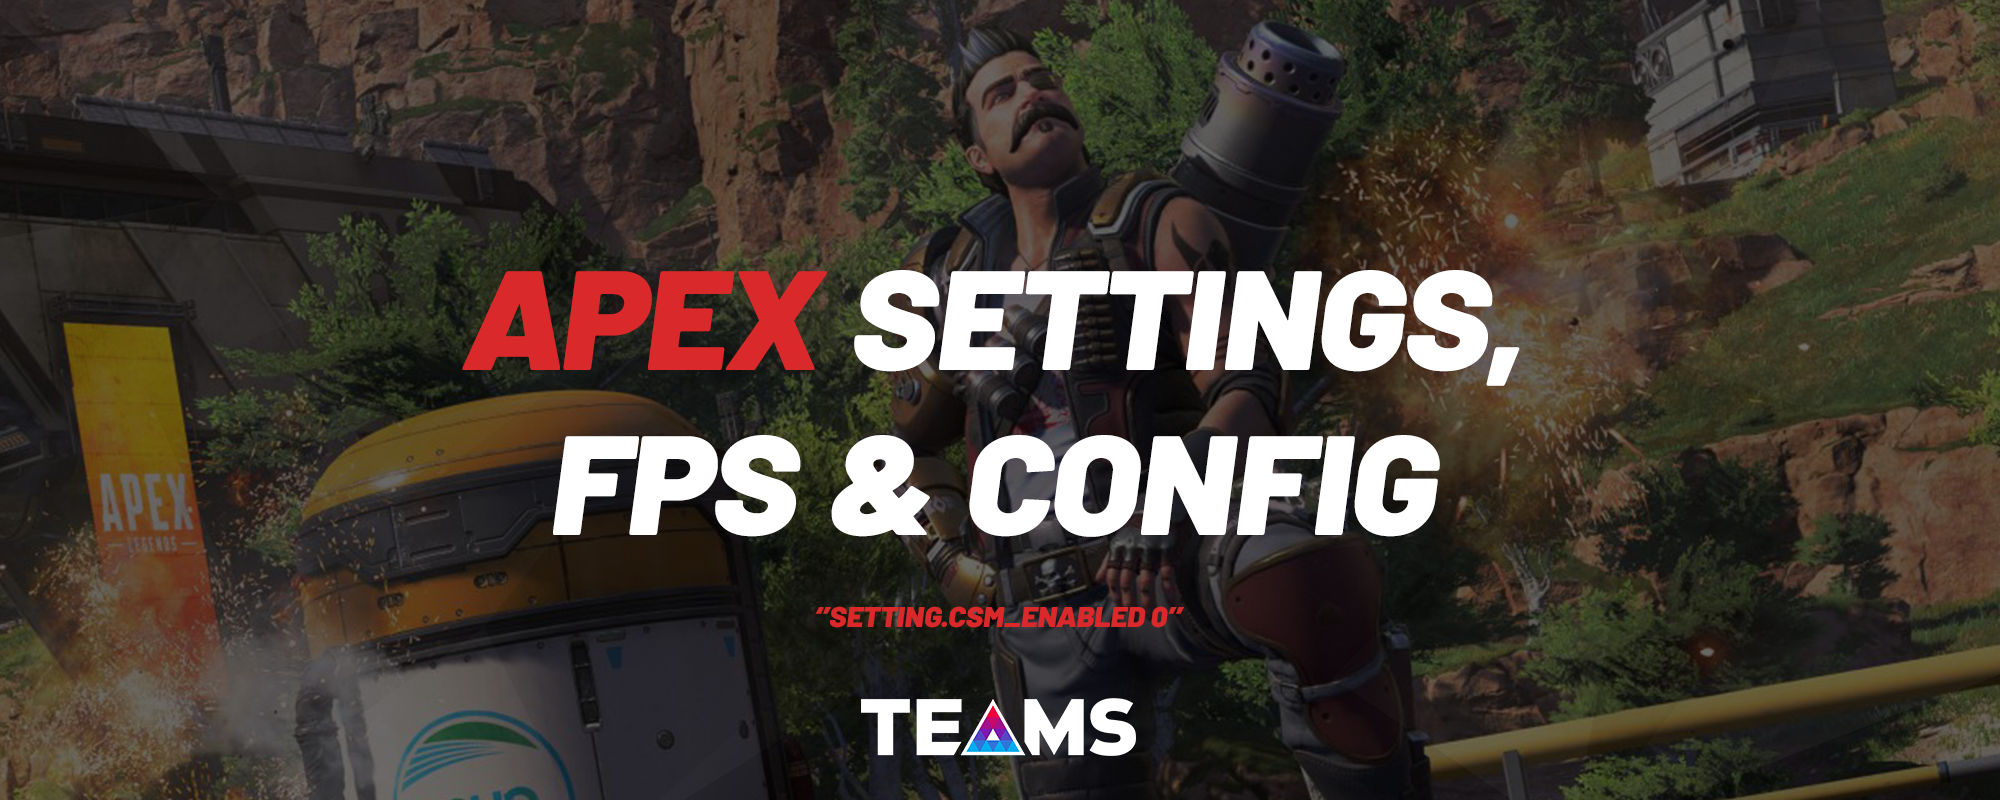 How to configure on-screen controls in Apex Legends Mobile